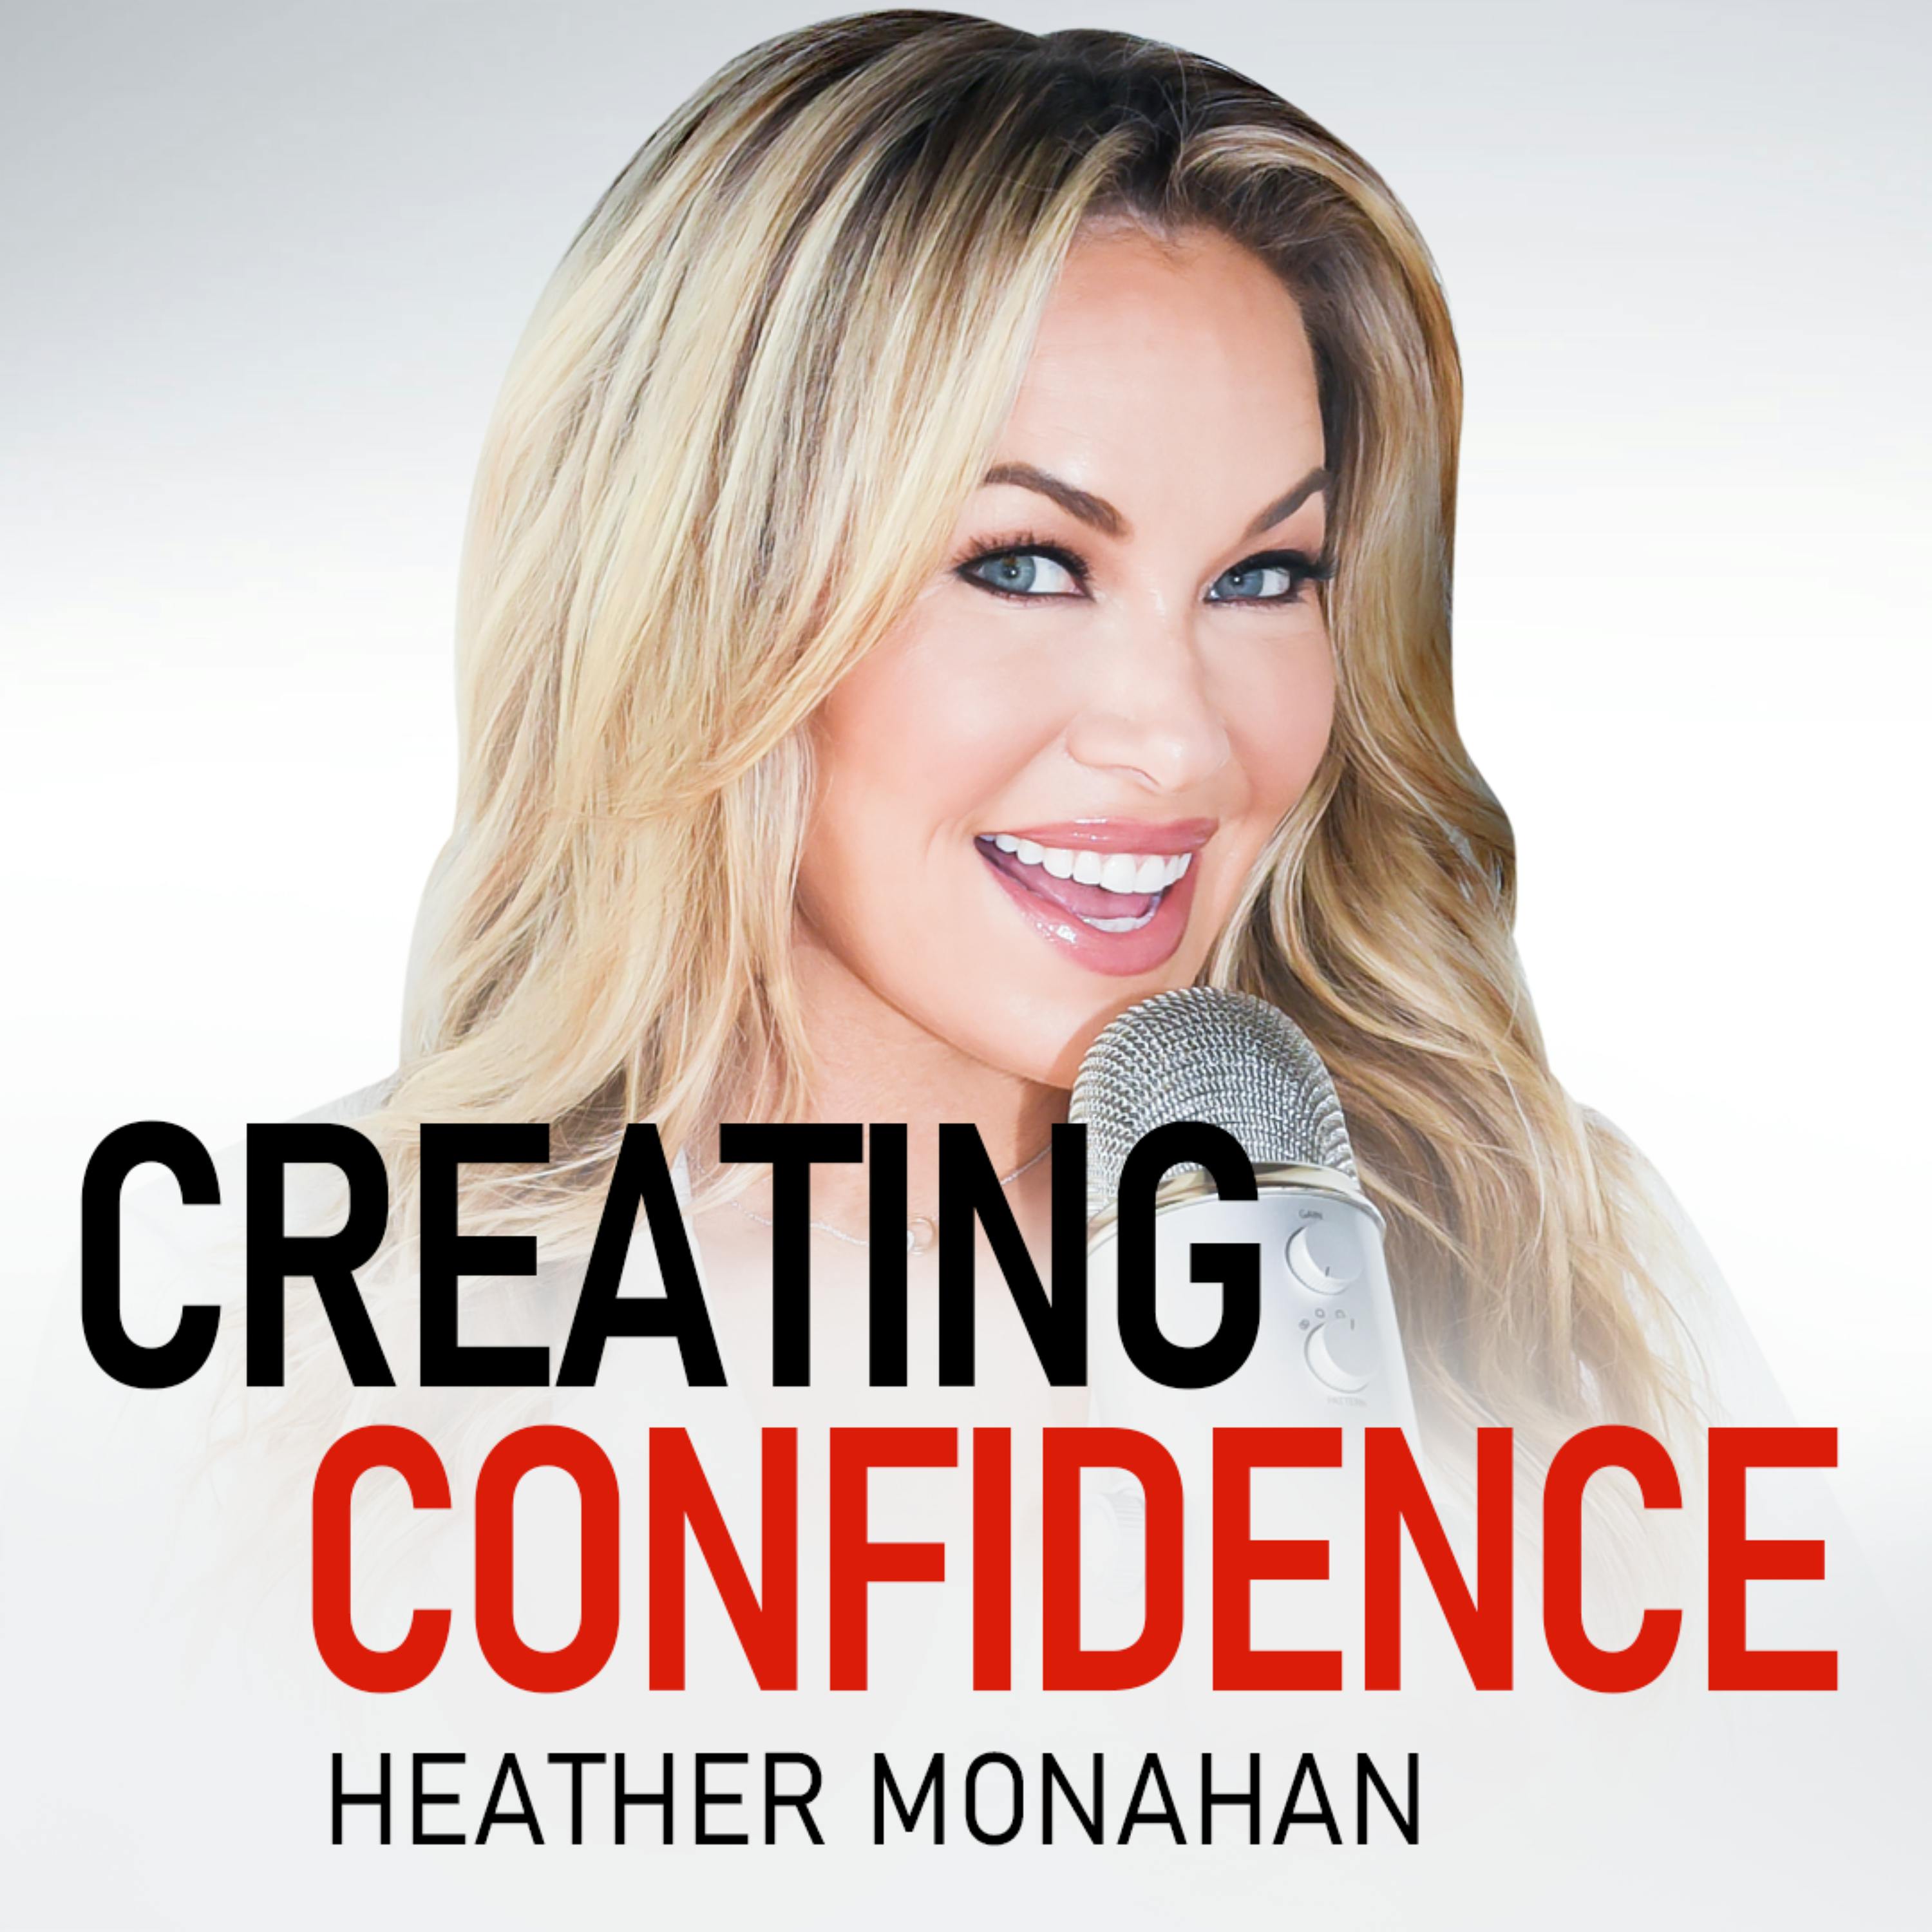 #303: The 6 Foods You NEED For A Healthy Gut & Brain Connection, With Dr. Amy Shah by Heather Monahan | YAP Media Network